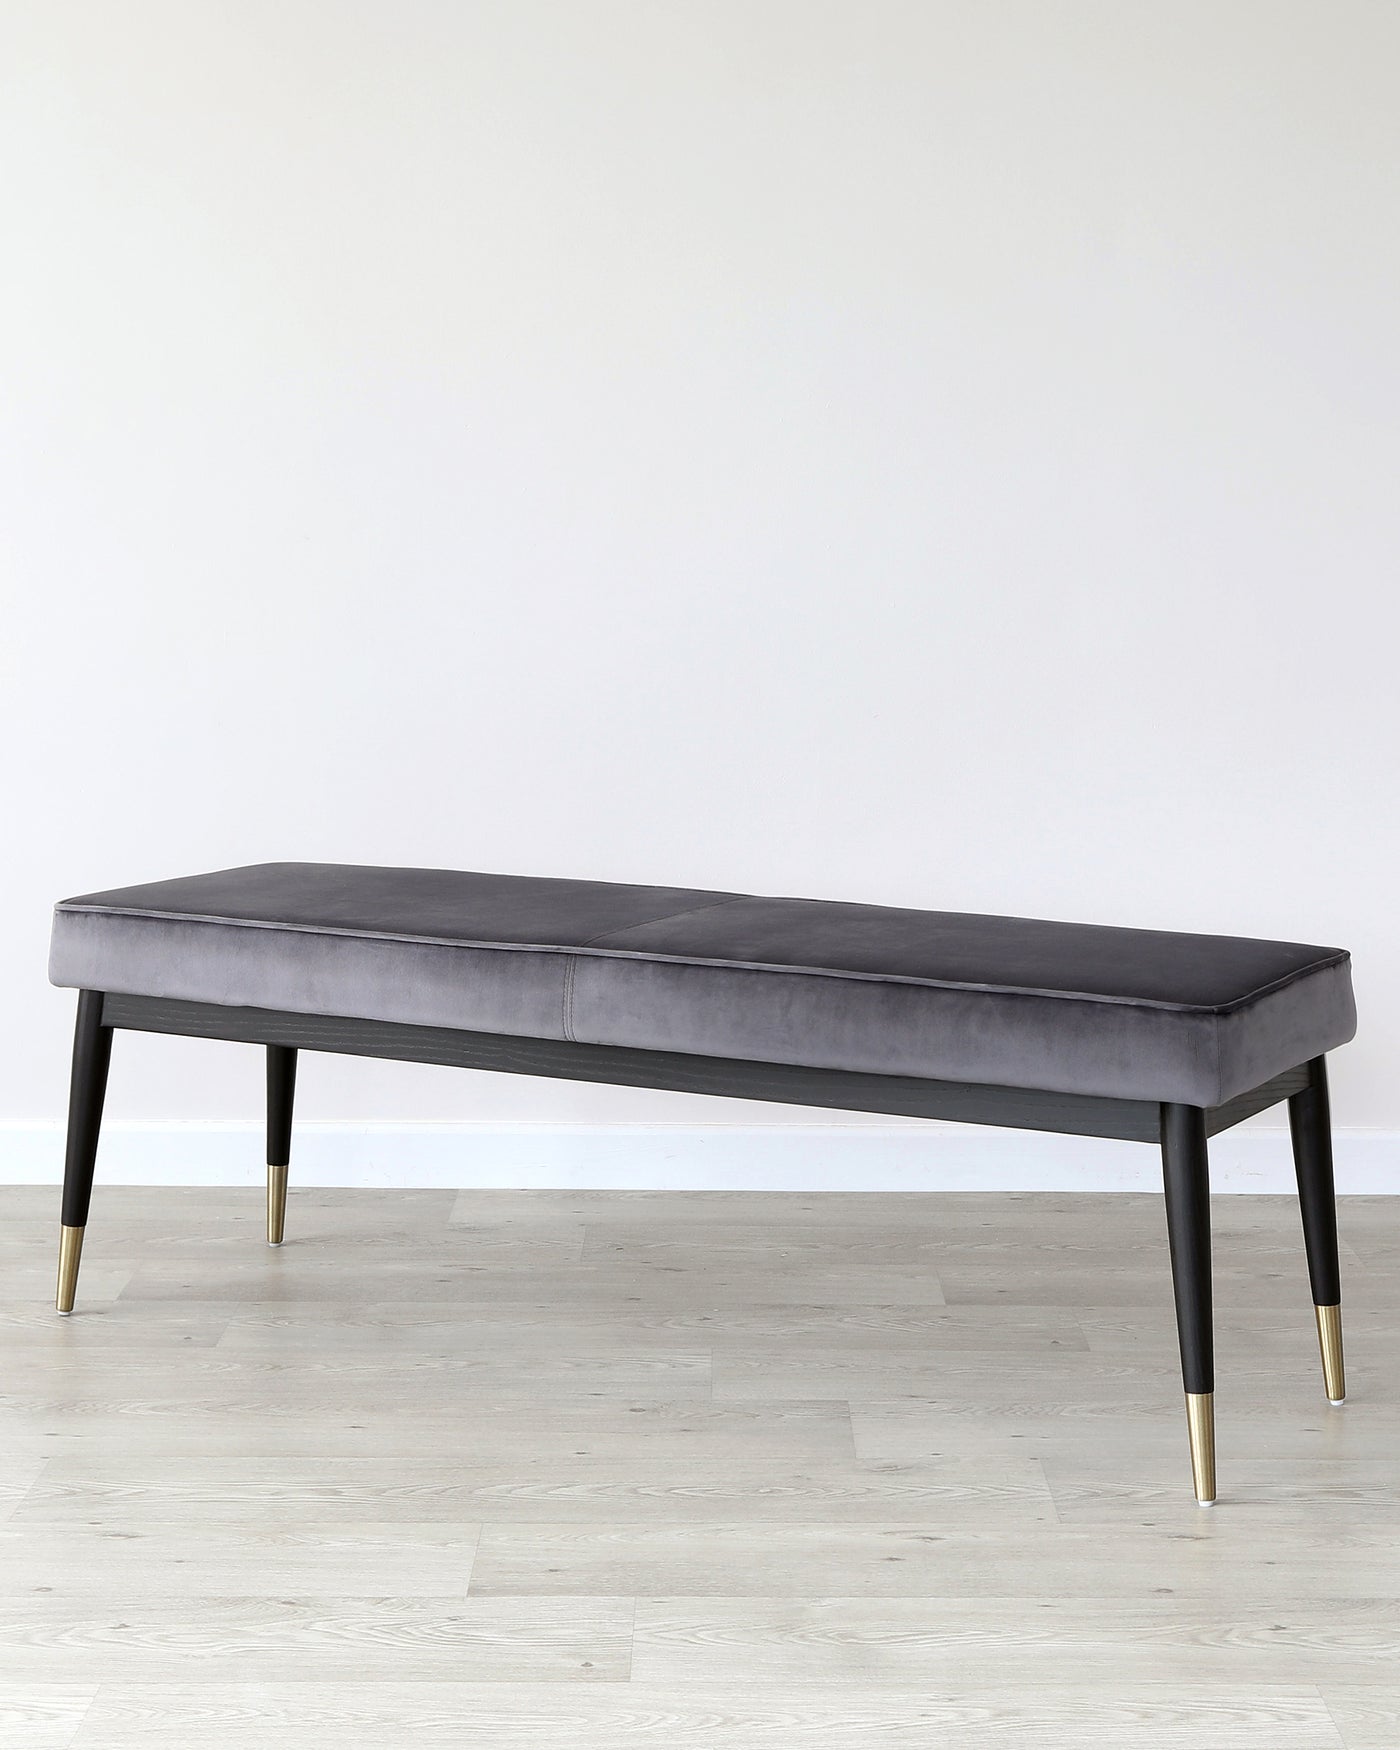 A modern upholstered bench with a sleek, grey velvet seat and black wooden legs tipped with gold metal accents. The bench stands against a neutral background, highlighting its elegant and contemporary design.